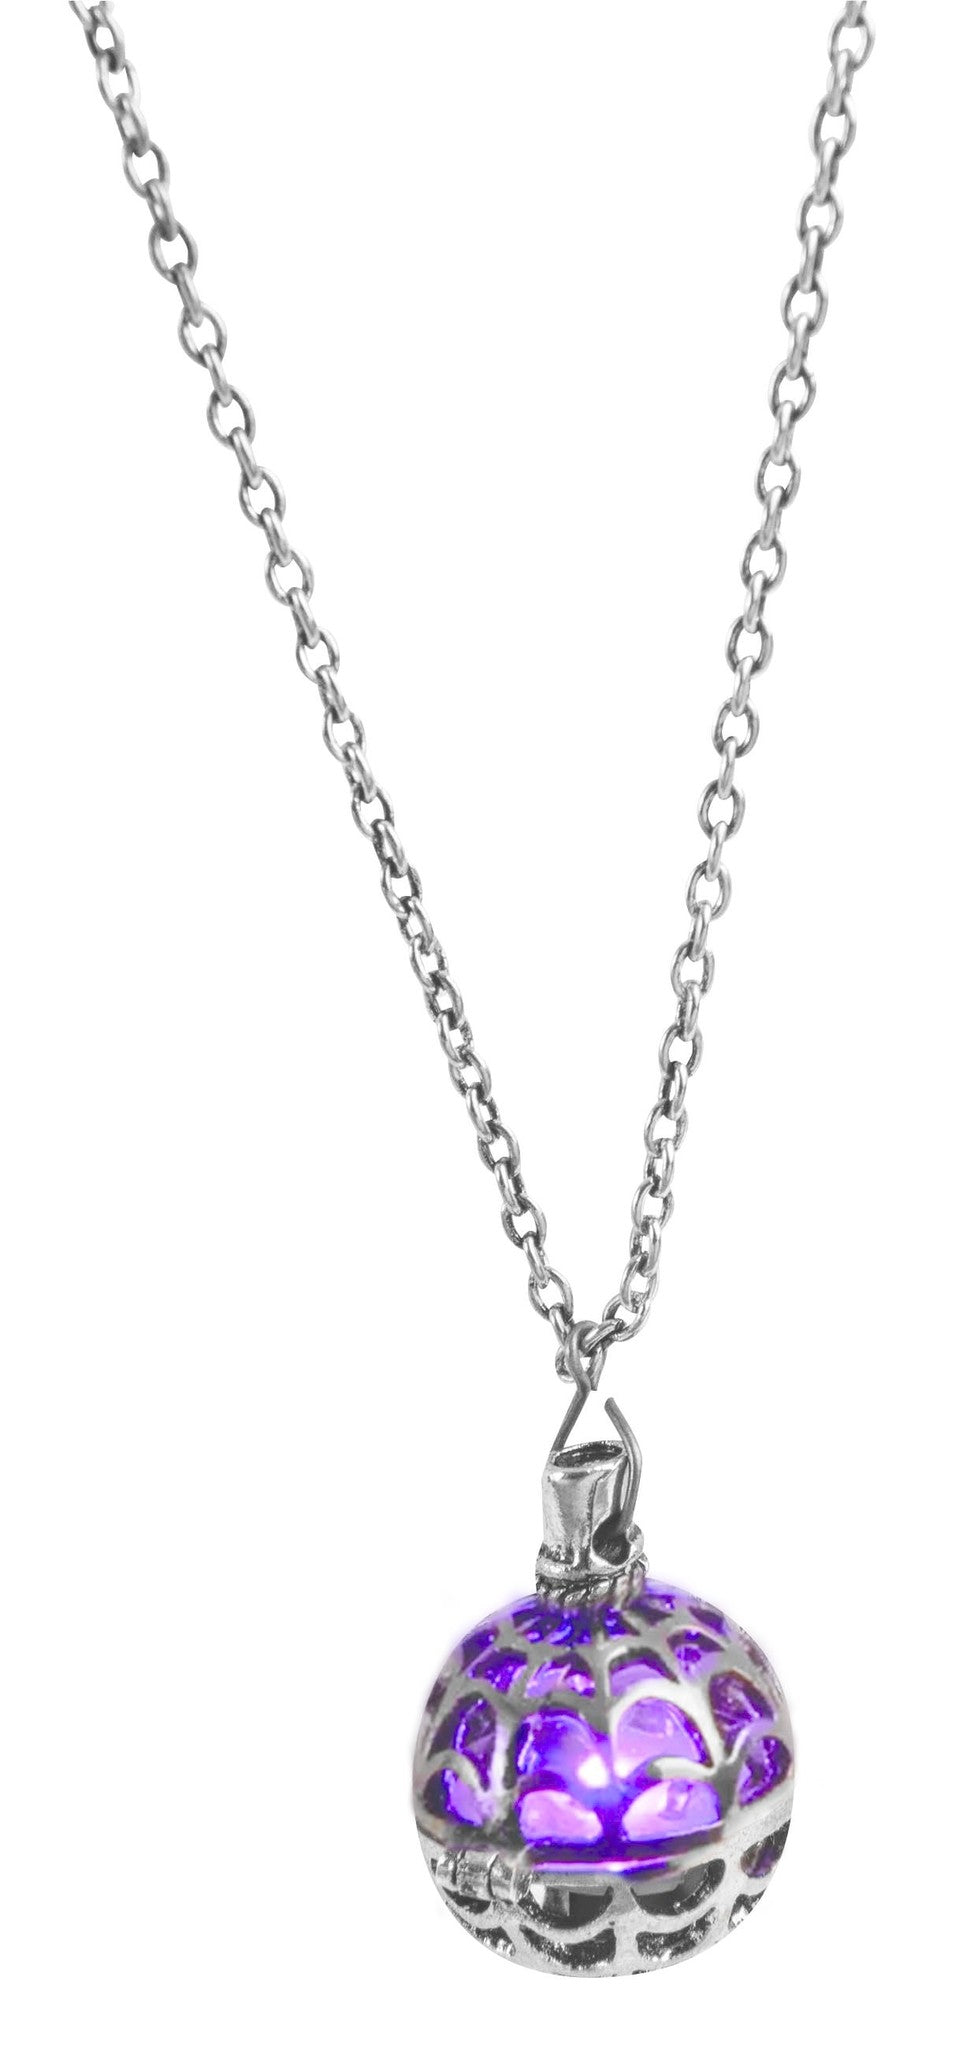 Witches & Wizards: Light Up Spider Web Necklace